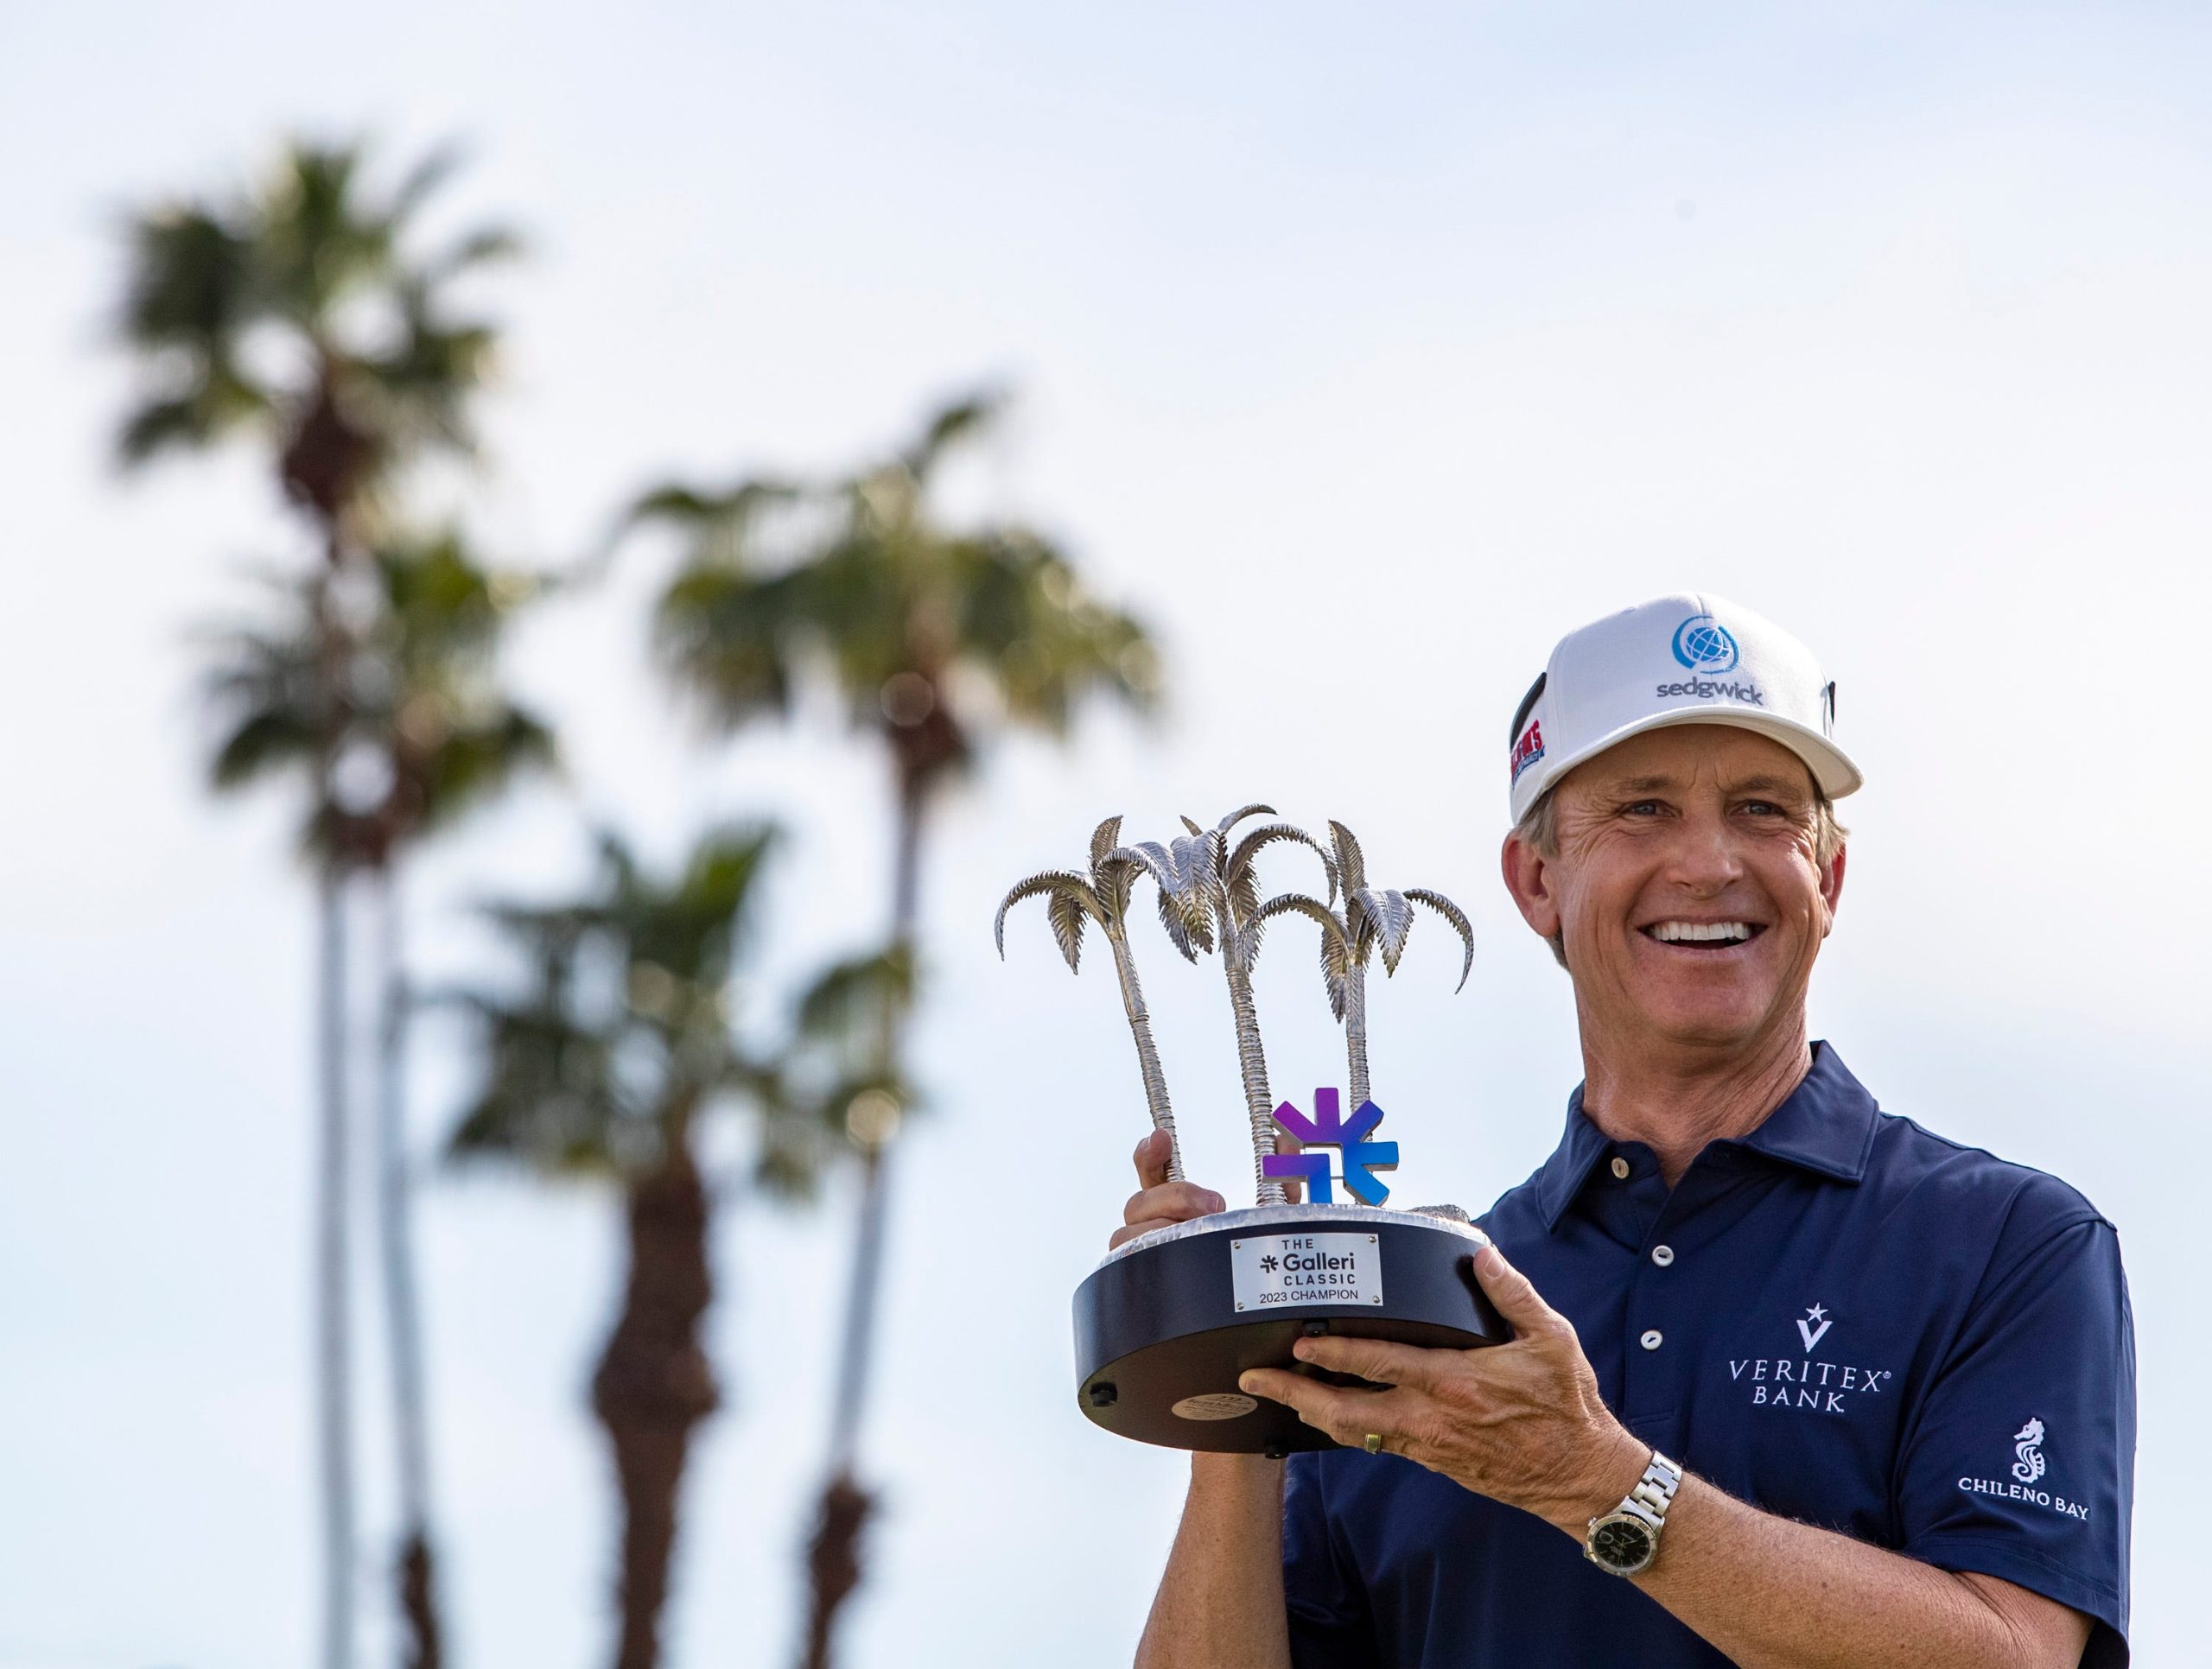 David Toms rallies over final nine holes to win inaugural Galleri Classic at Mission Hills